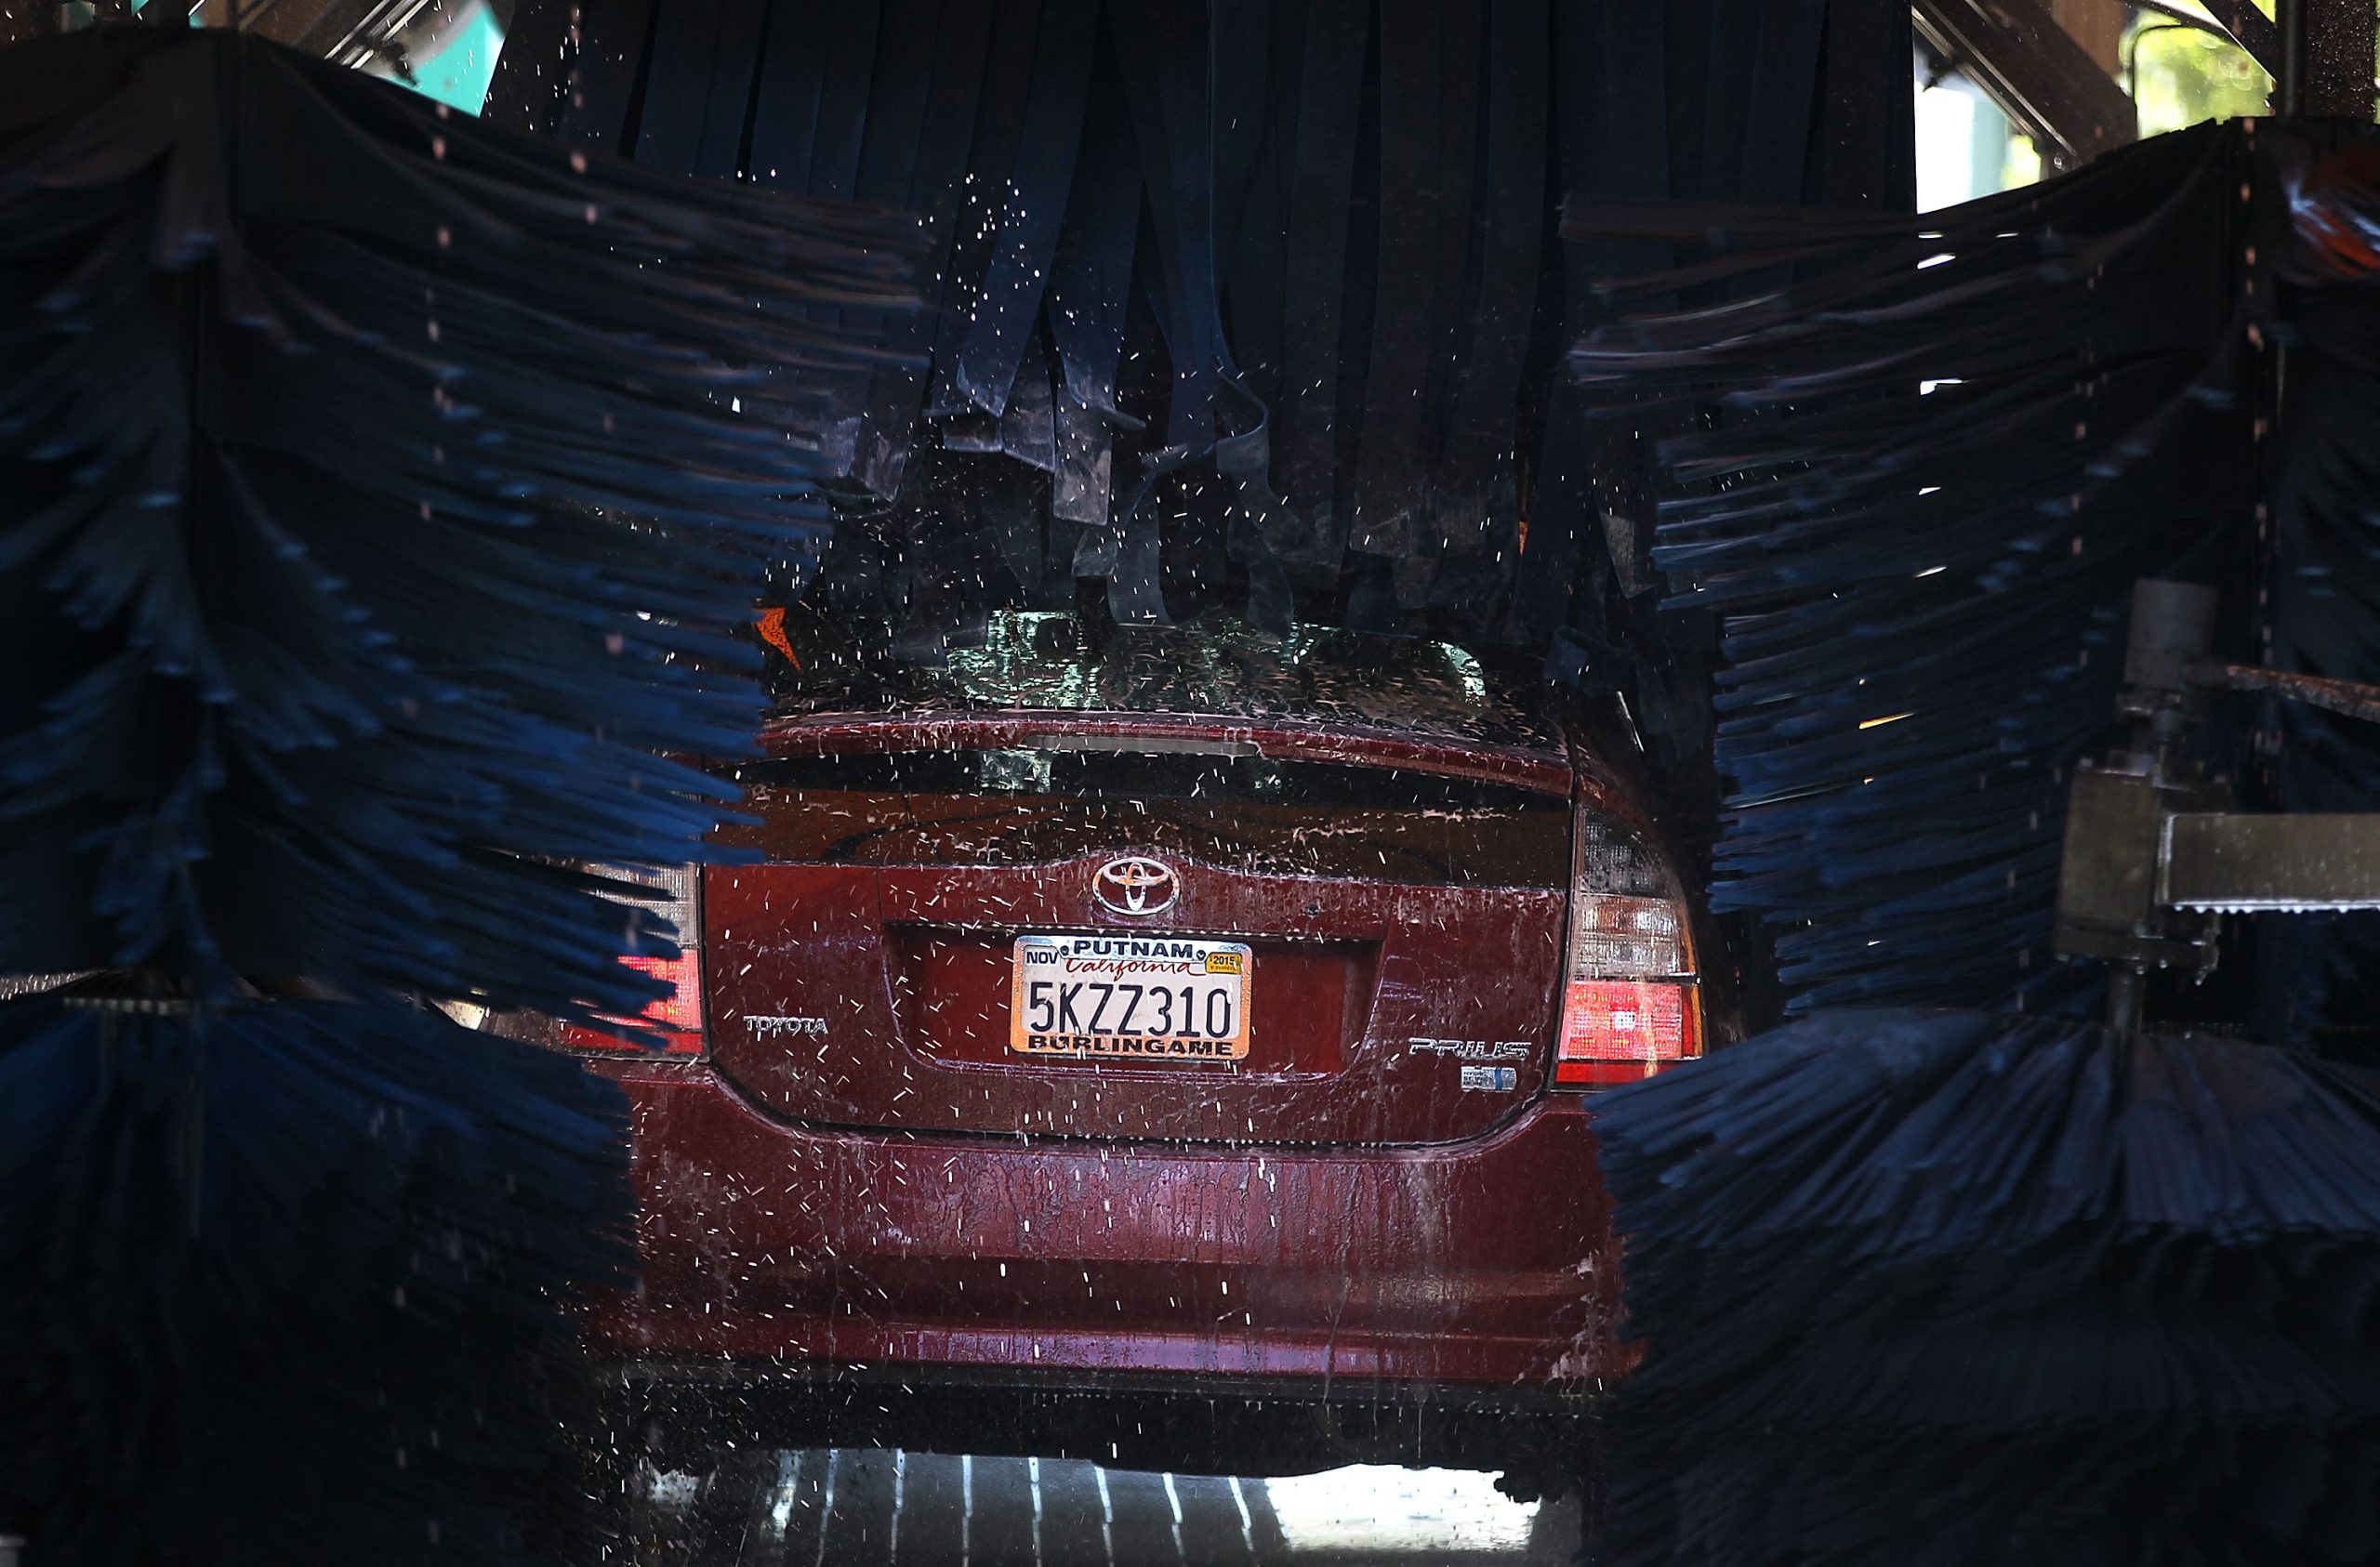 A maroon Toyota Prius goes through an automatic car wash